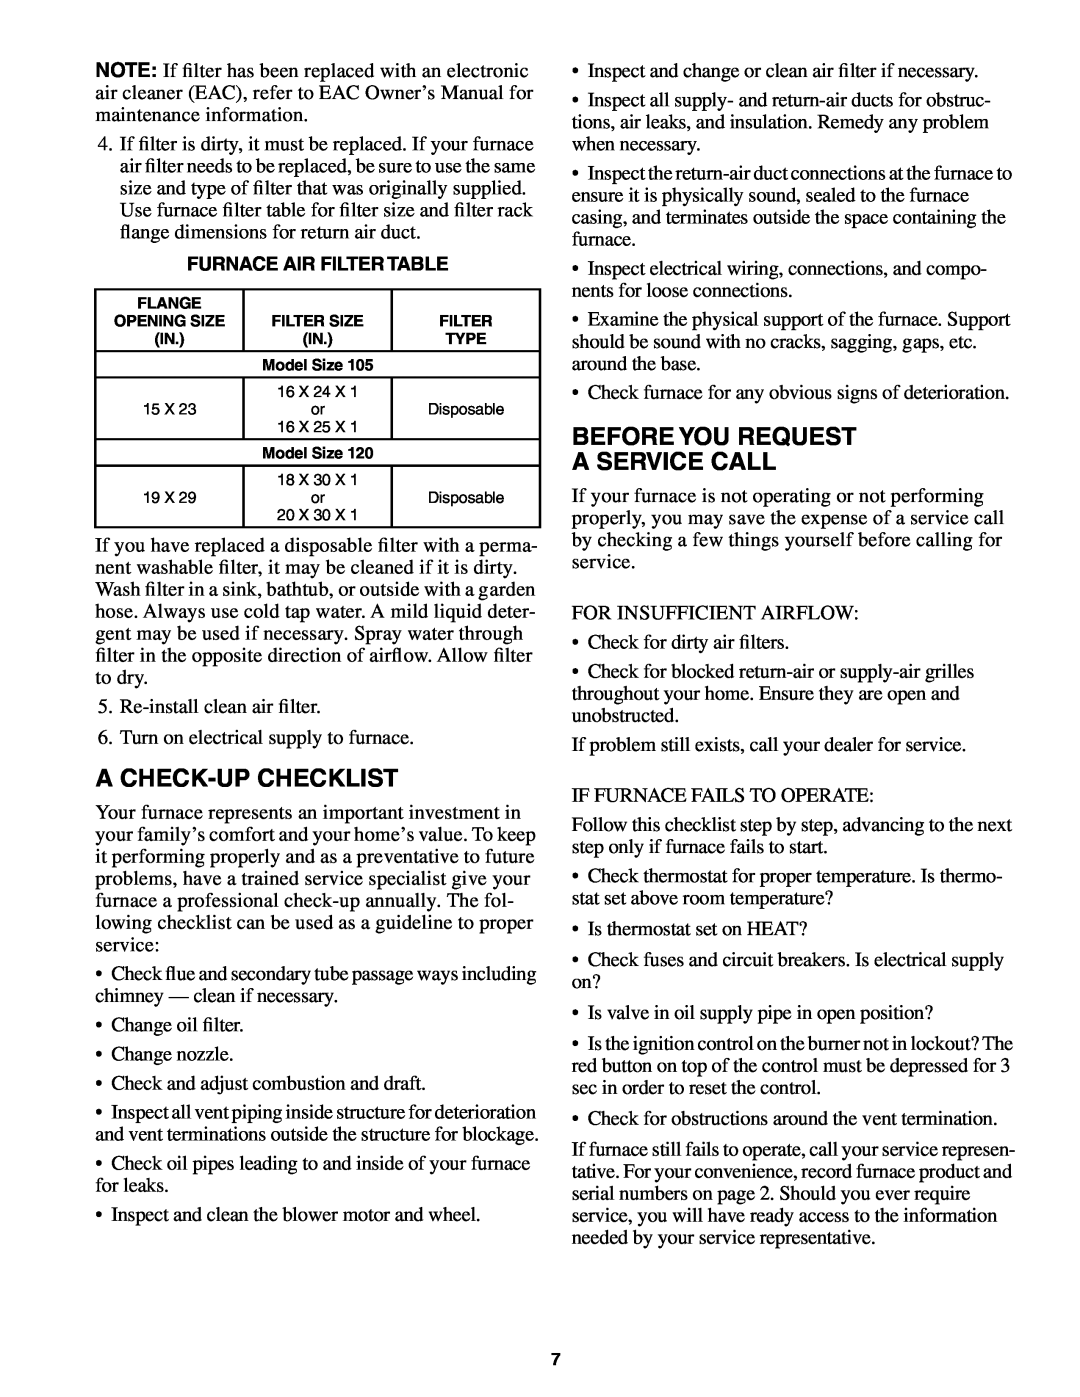 Carrier 58VMR manual Before You Request A Service Call, A Check-Upchecklist, Furnace Air Filter Table 